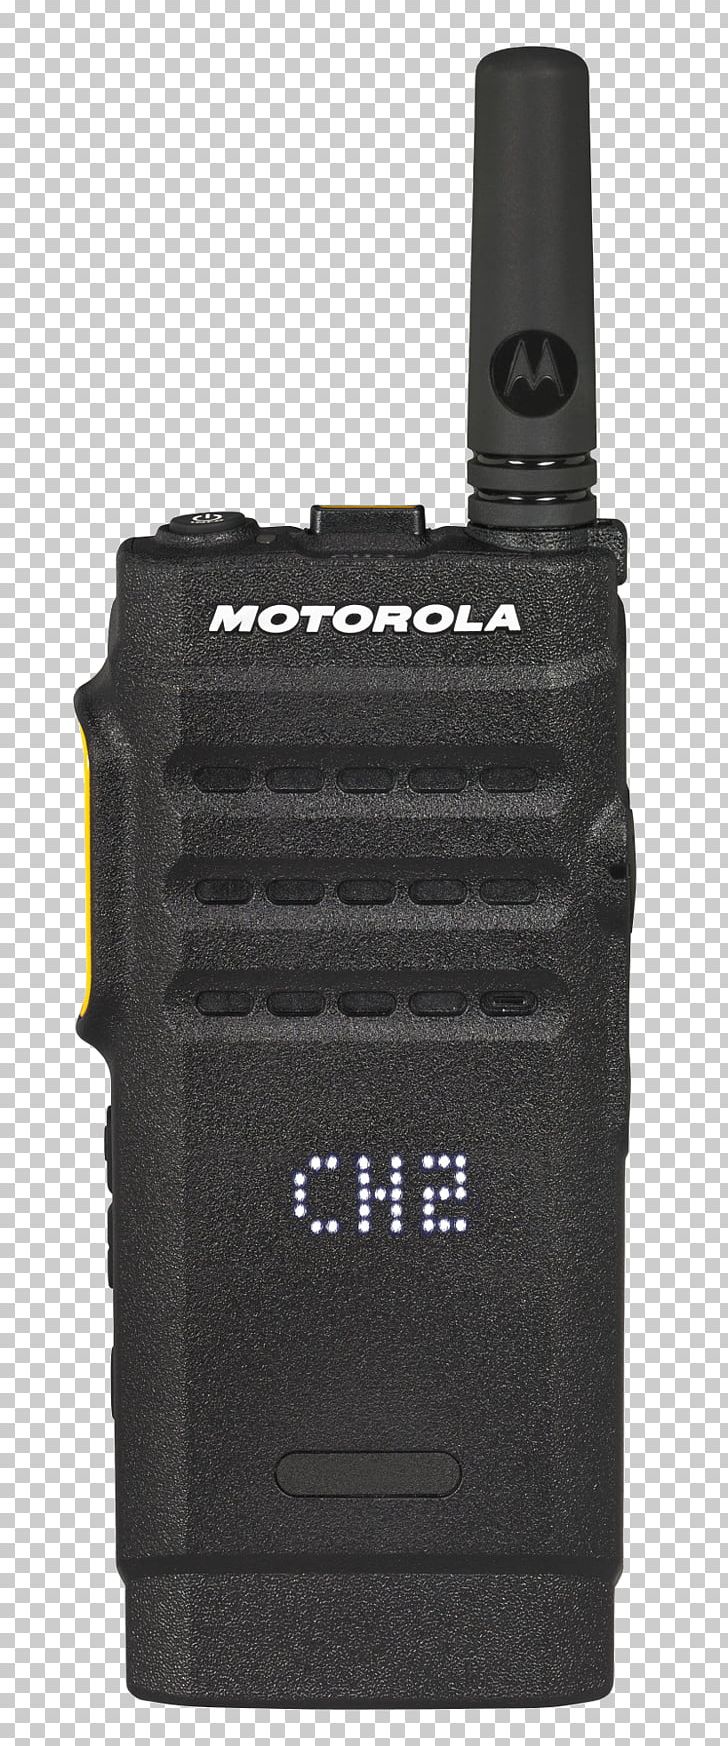 Two-way Radio Motorola SL300 Motorola Solutions Push-to-talk PNG, Clipart, Aerials, Electronic Device, Electronics, Mobile Phones, Mot Free PNG Download